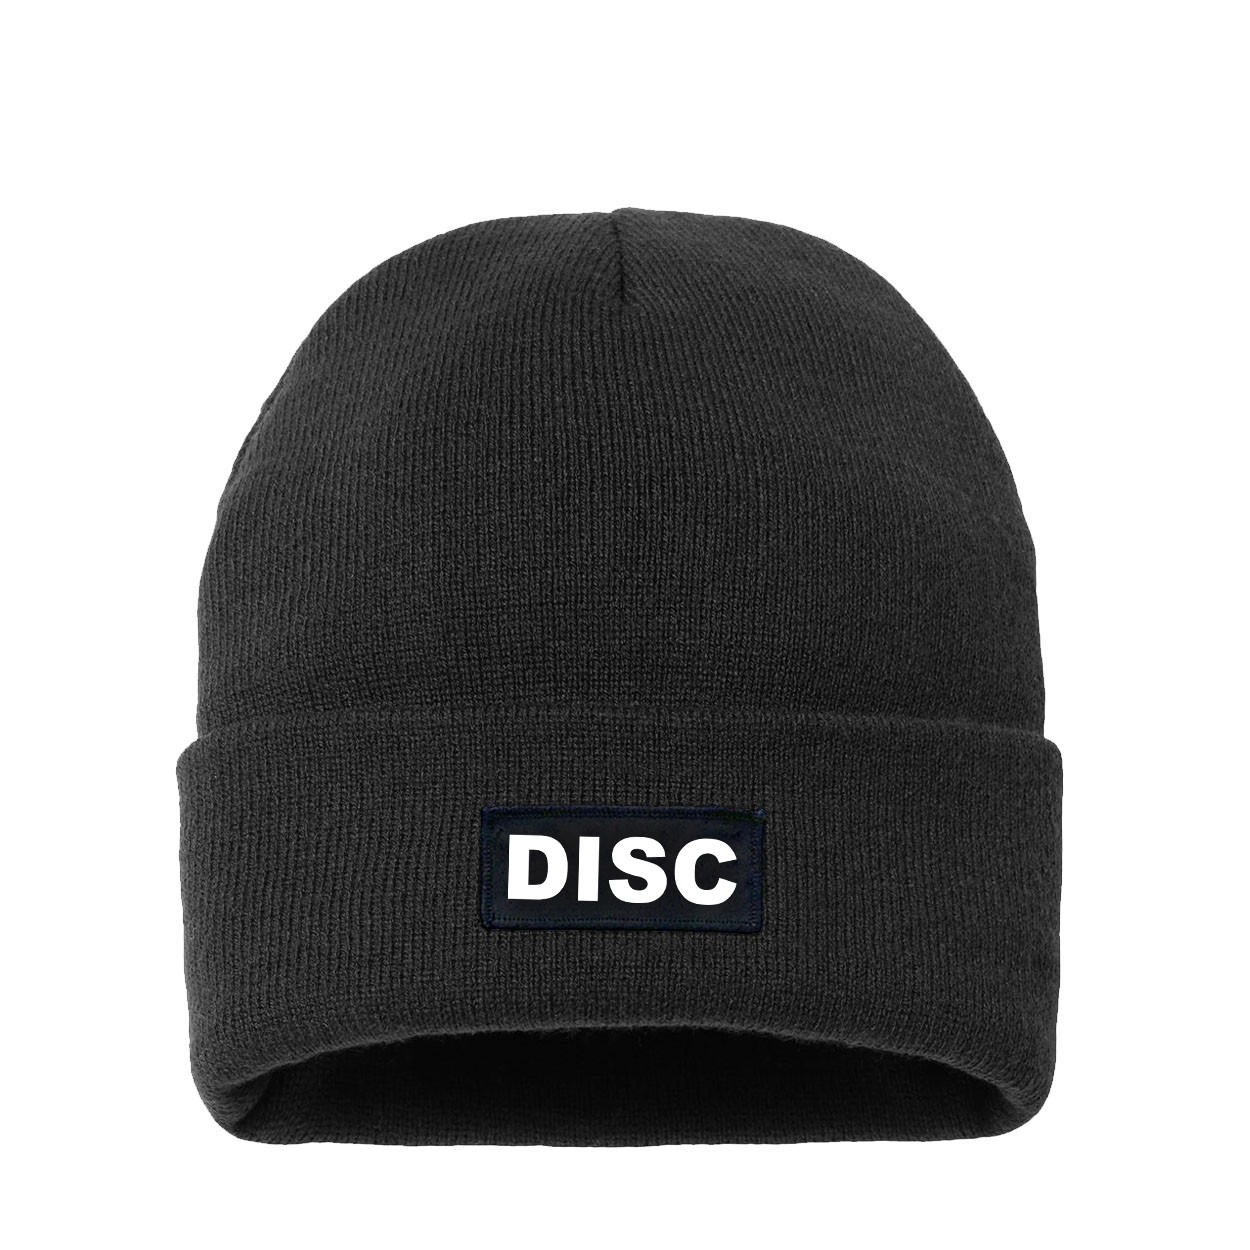 Disc Brand Logo Night Out Woven Patch Night Out Sherpa Lined Cuffed Beanie Black (White Logo)